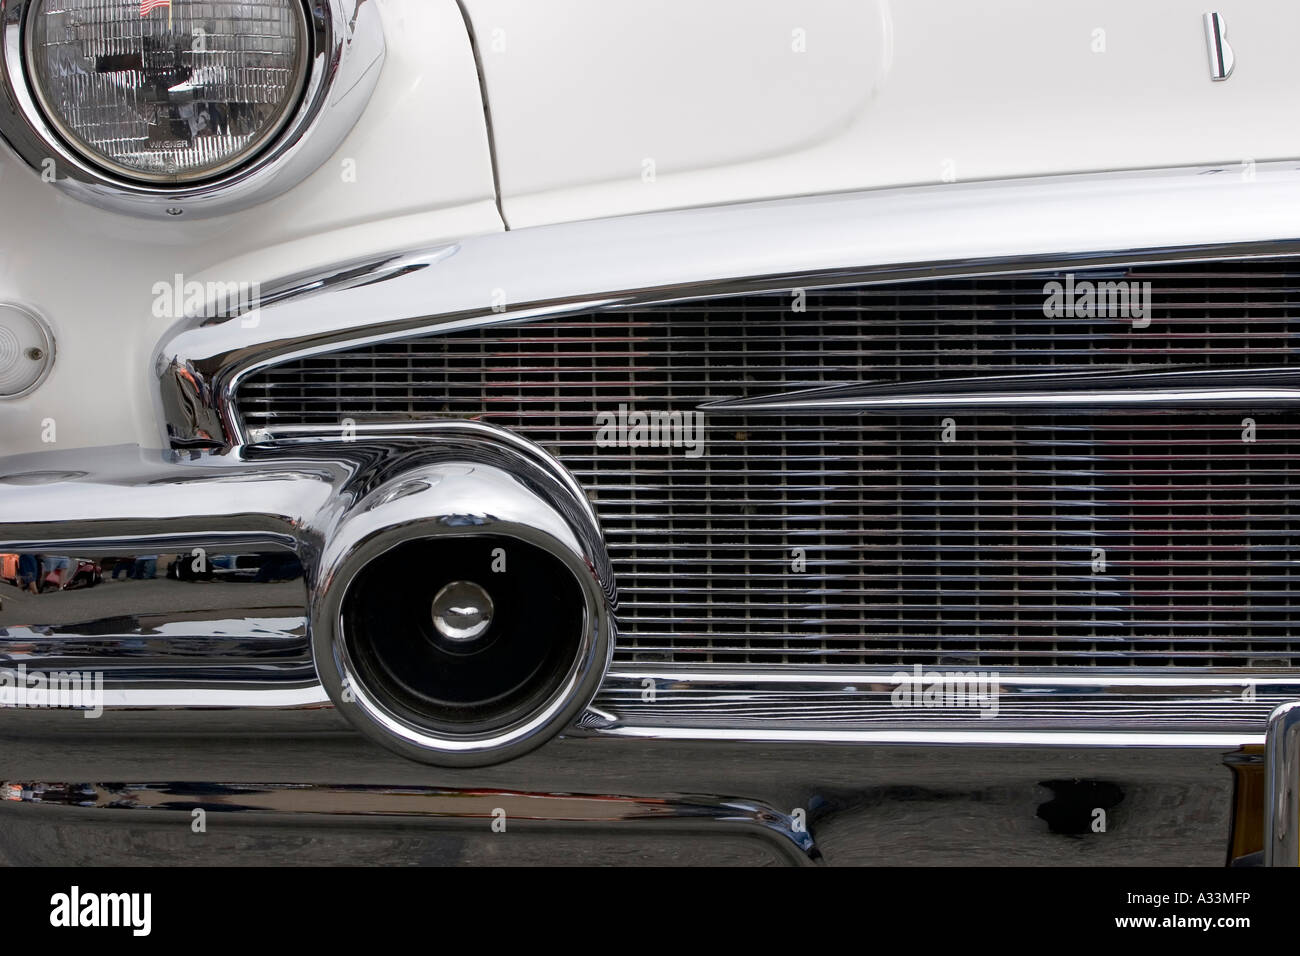 Abstract detail of a classic 1956 Buick Super automobile. Stock Photo